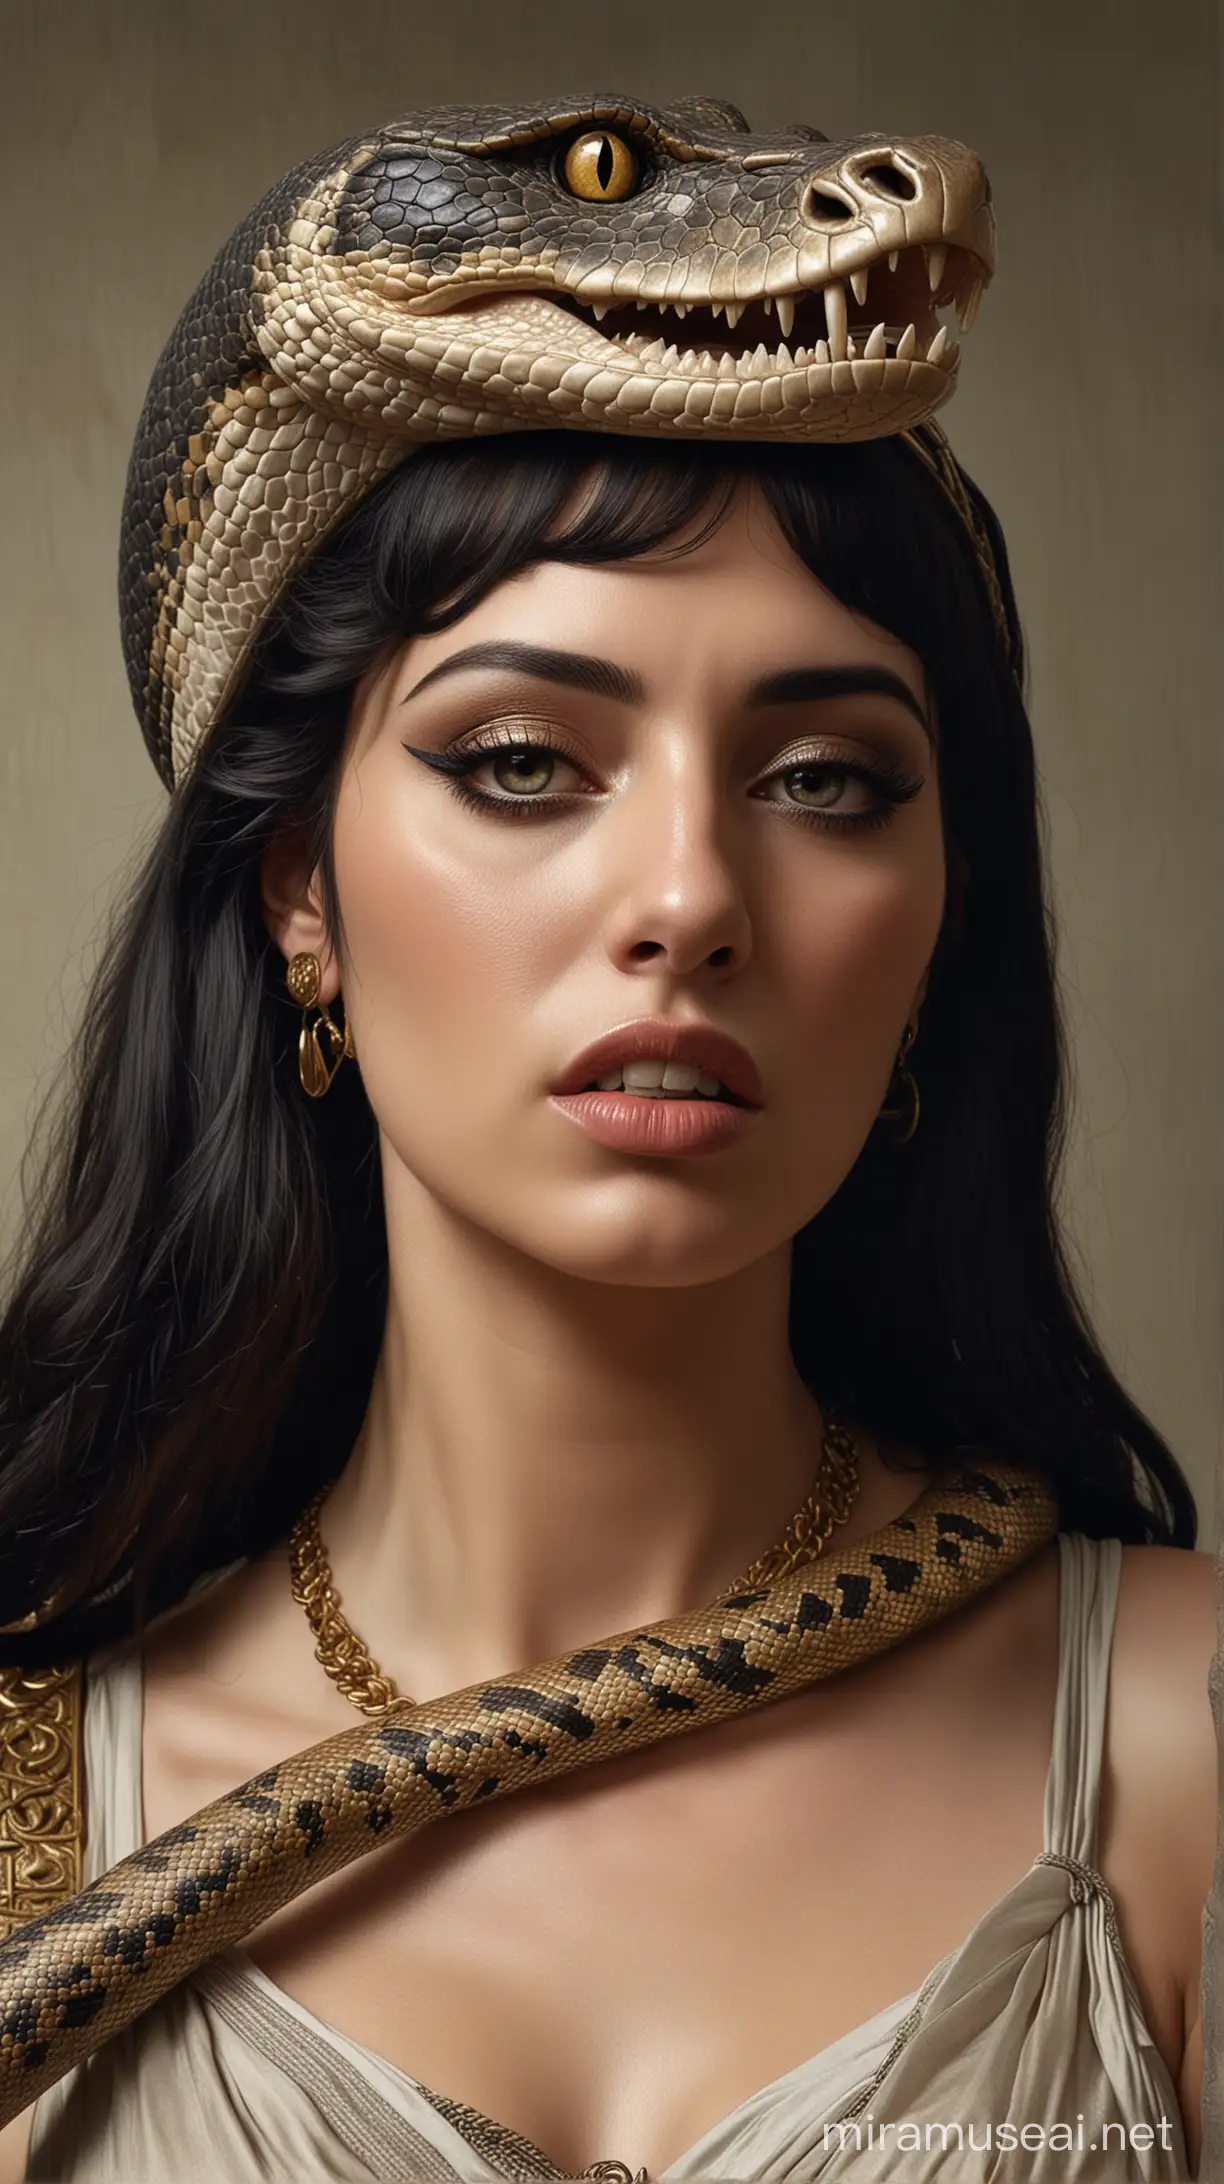 Imagery portraying Cleopatra's decision to commit suicide by allowing a snake to bite her, symbolizing her defiance and refusal to be captured. hyperrealistic